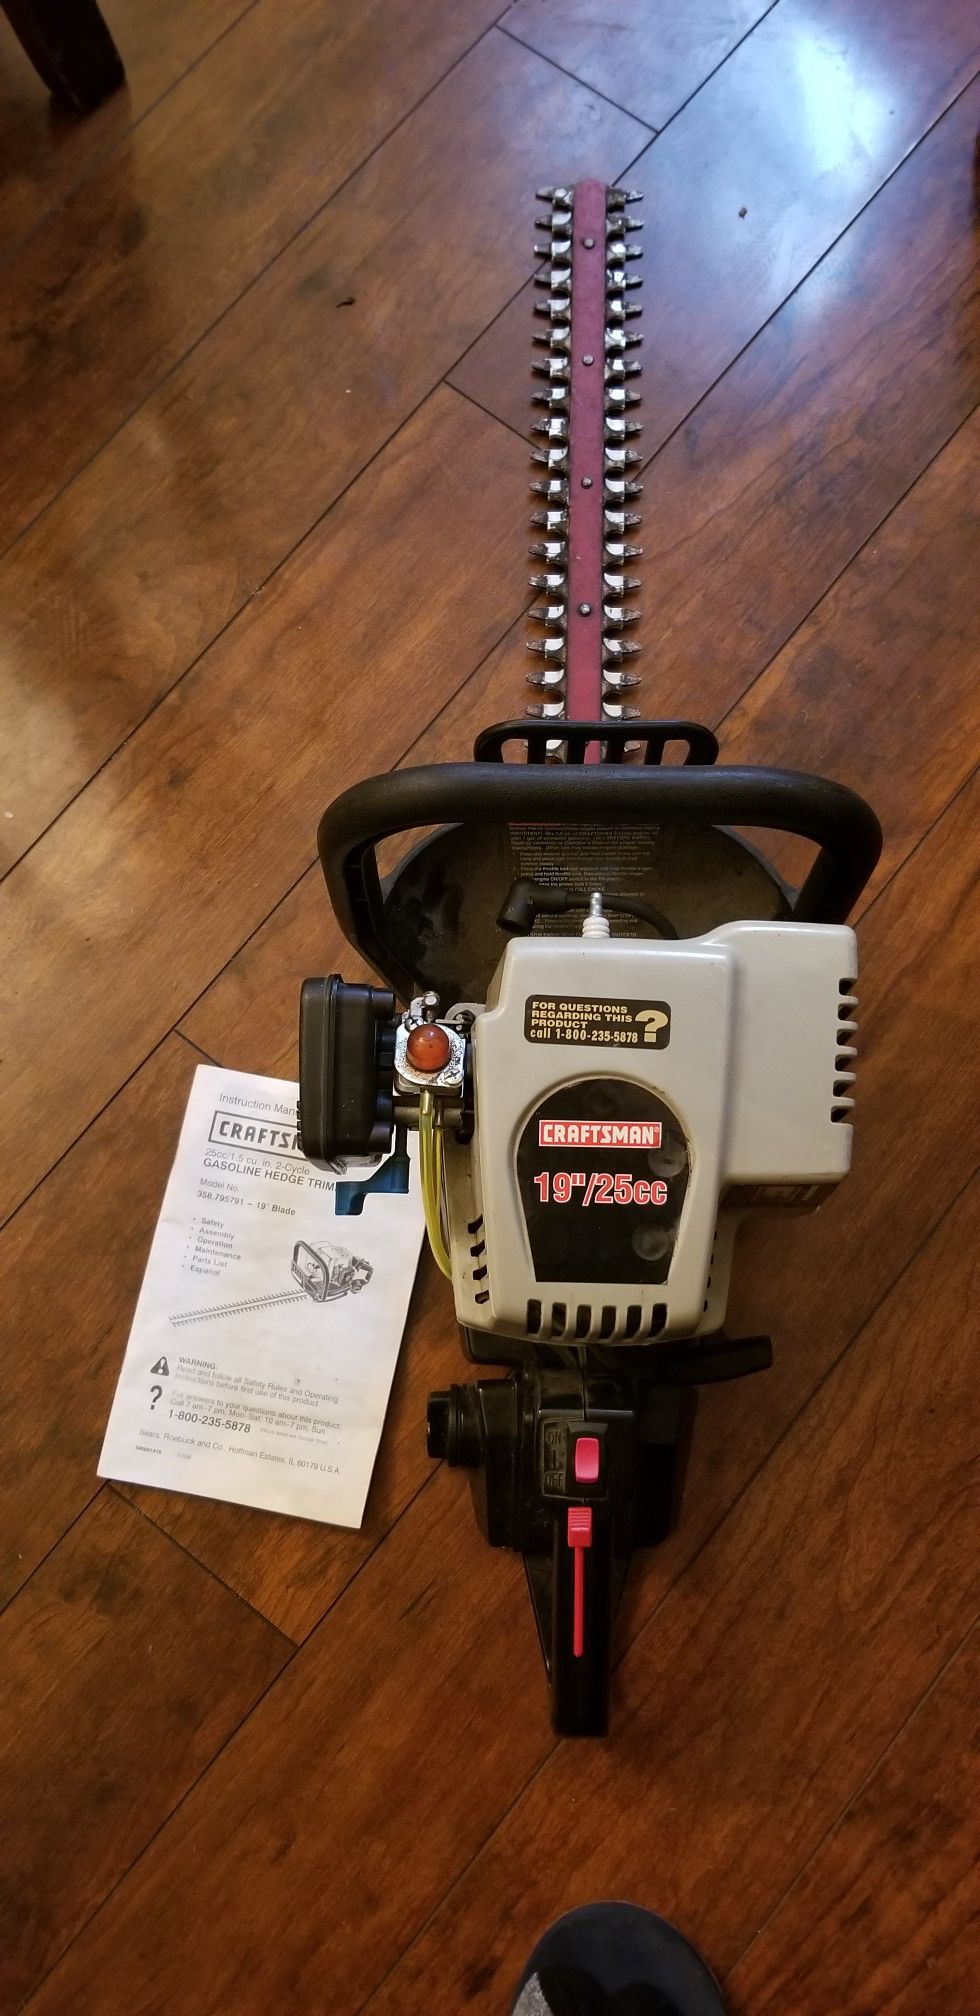 Hedge trimmer not (working)